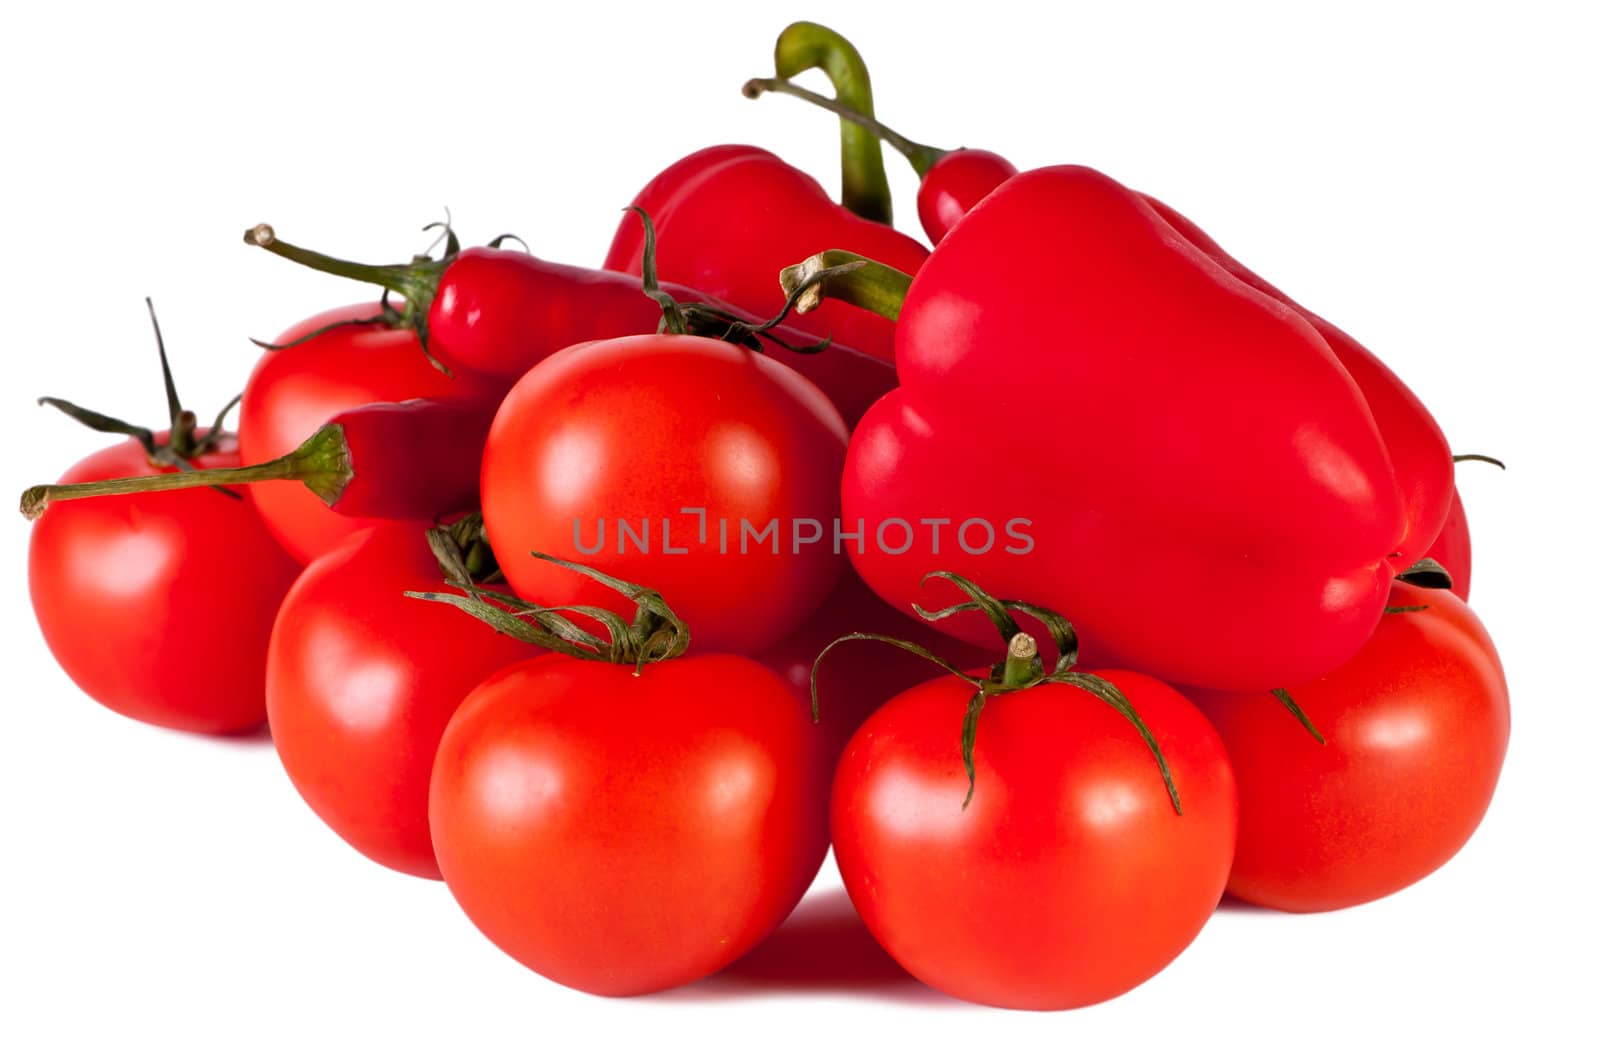 Peppers, tomatoes, lie on the white table. Vegetables on a white background.